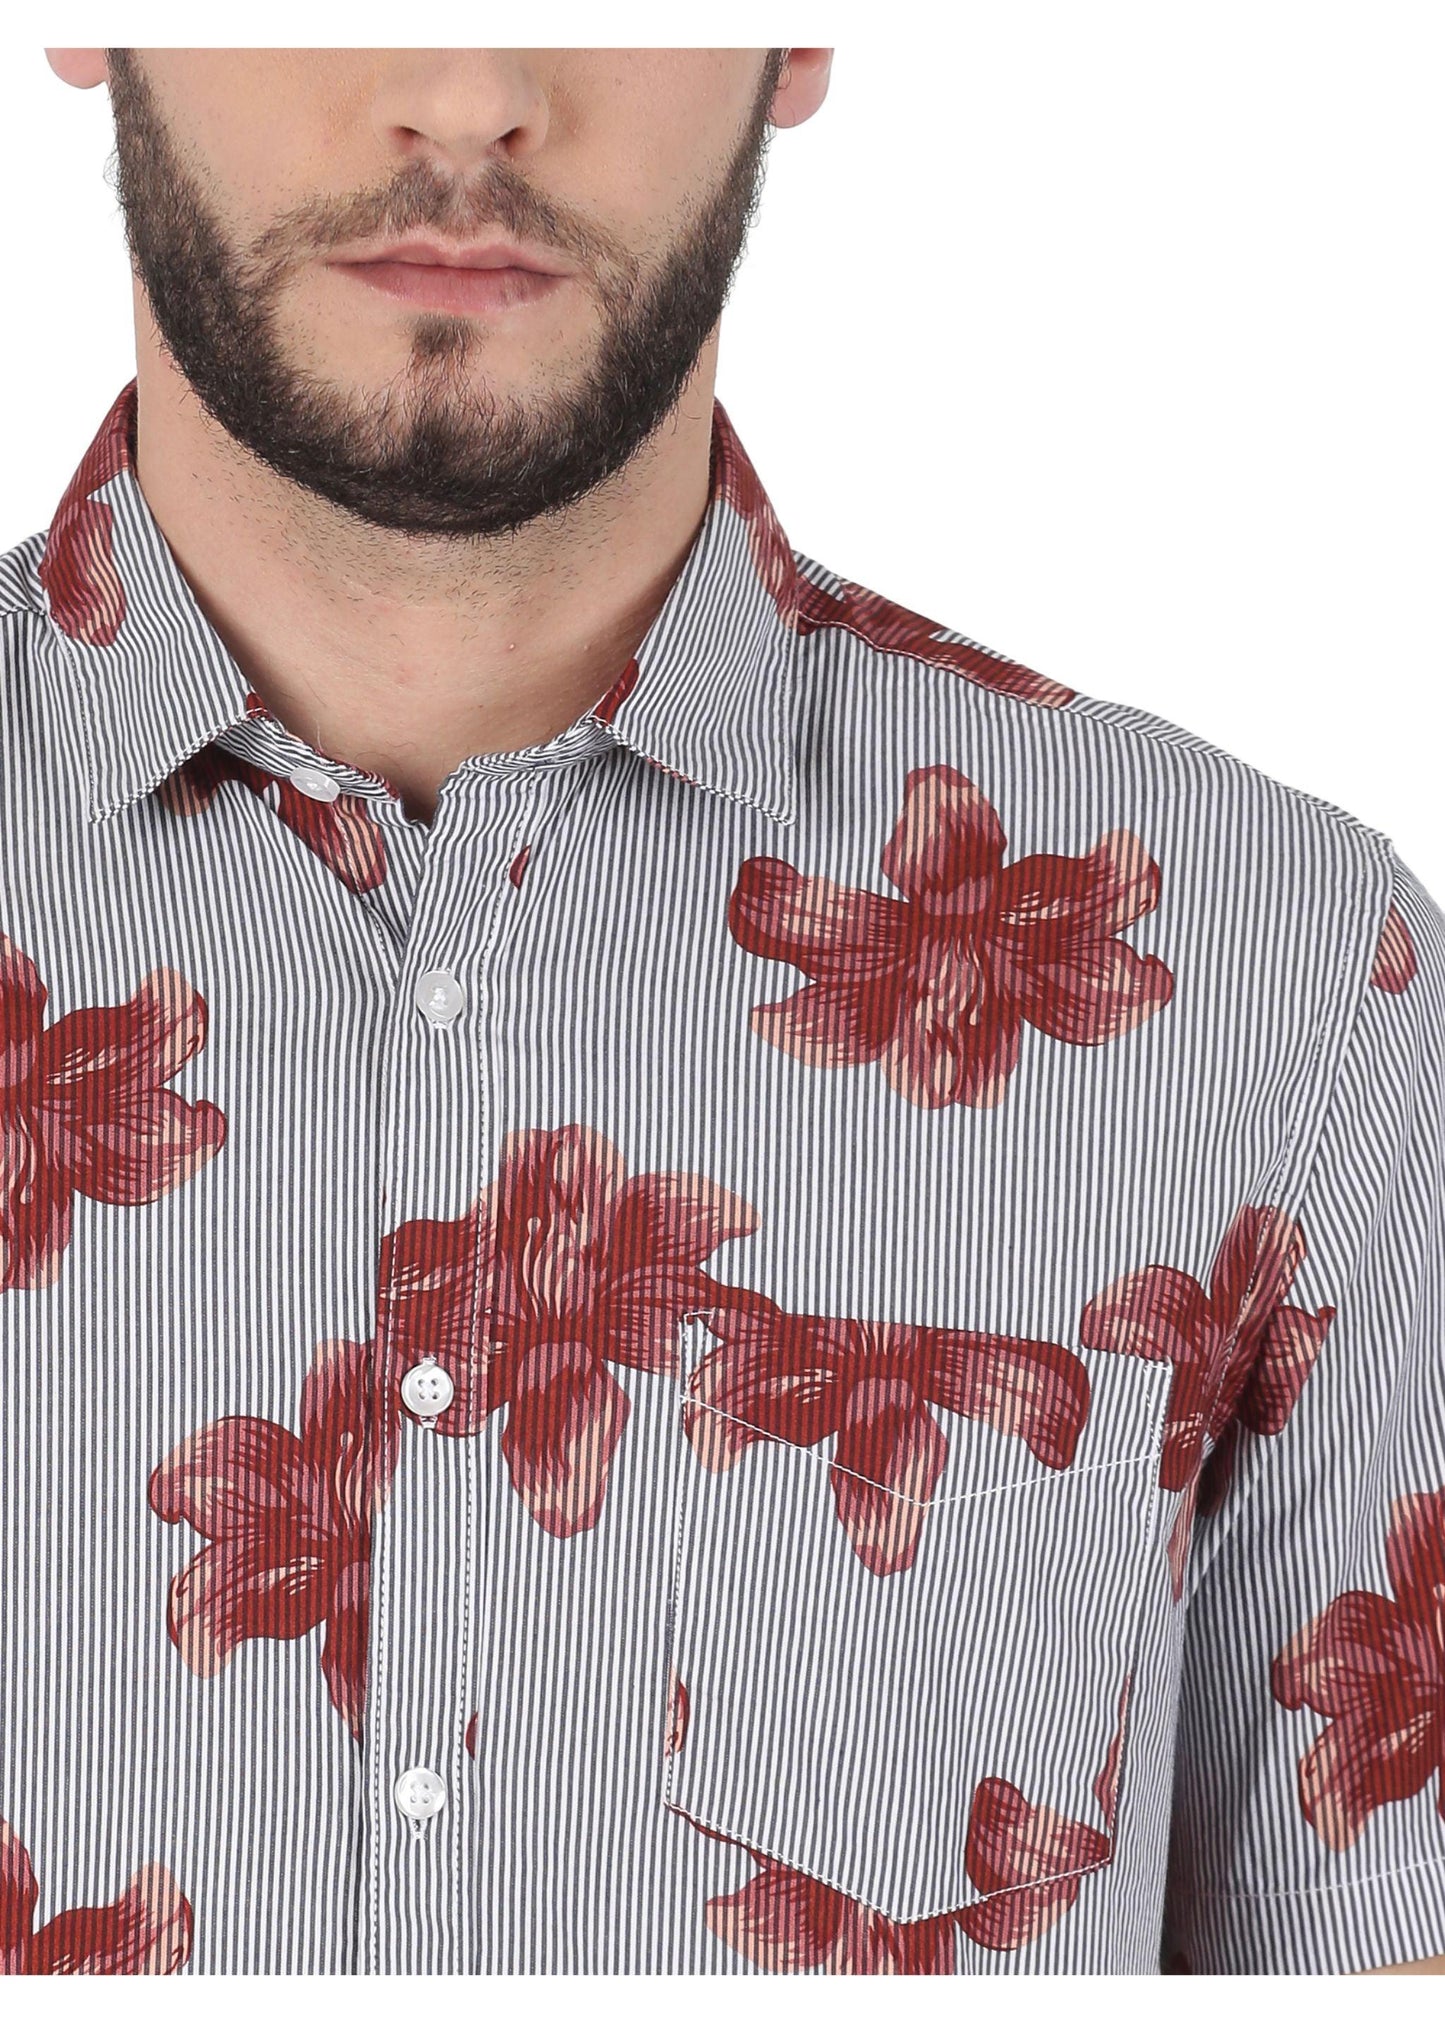 Tusok-brown-bloomFeatured Shirt, Vacation-Printed Shirtimage-Brown Bloom (5)